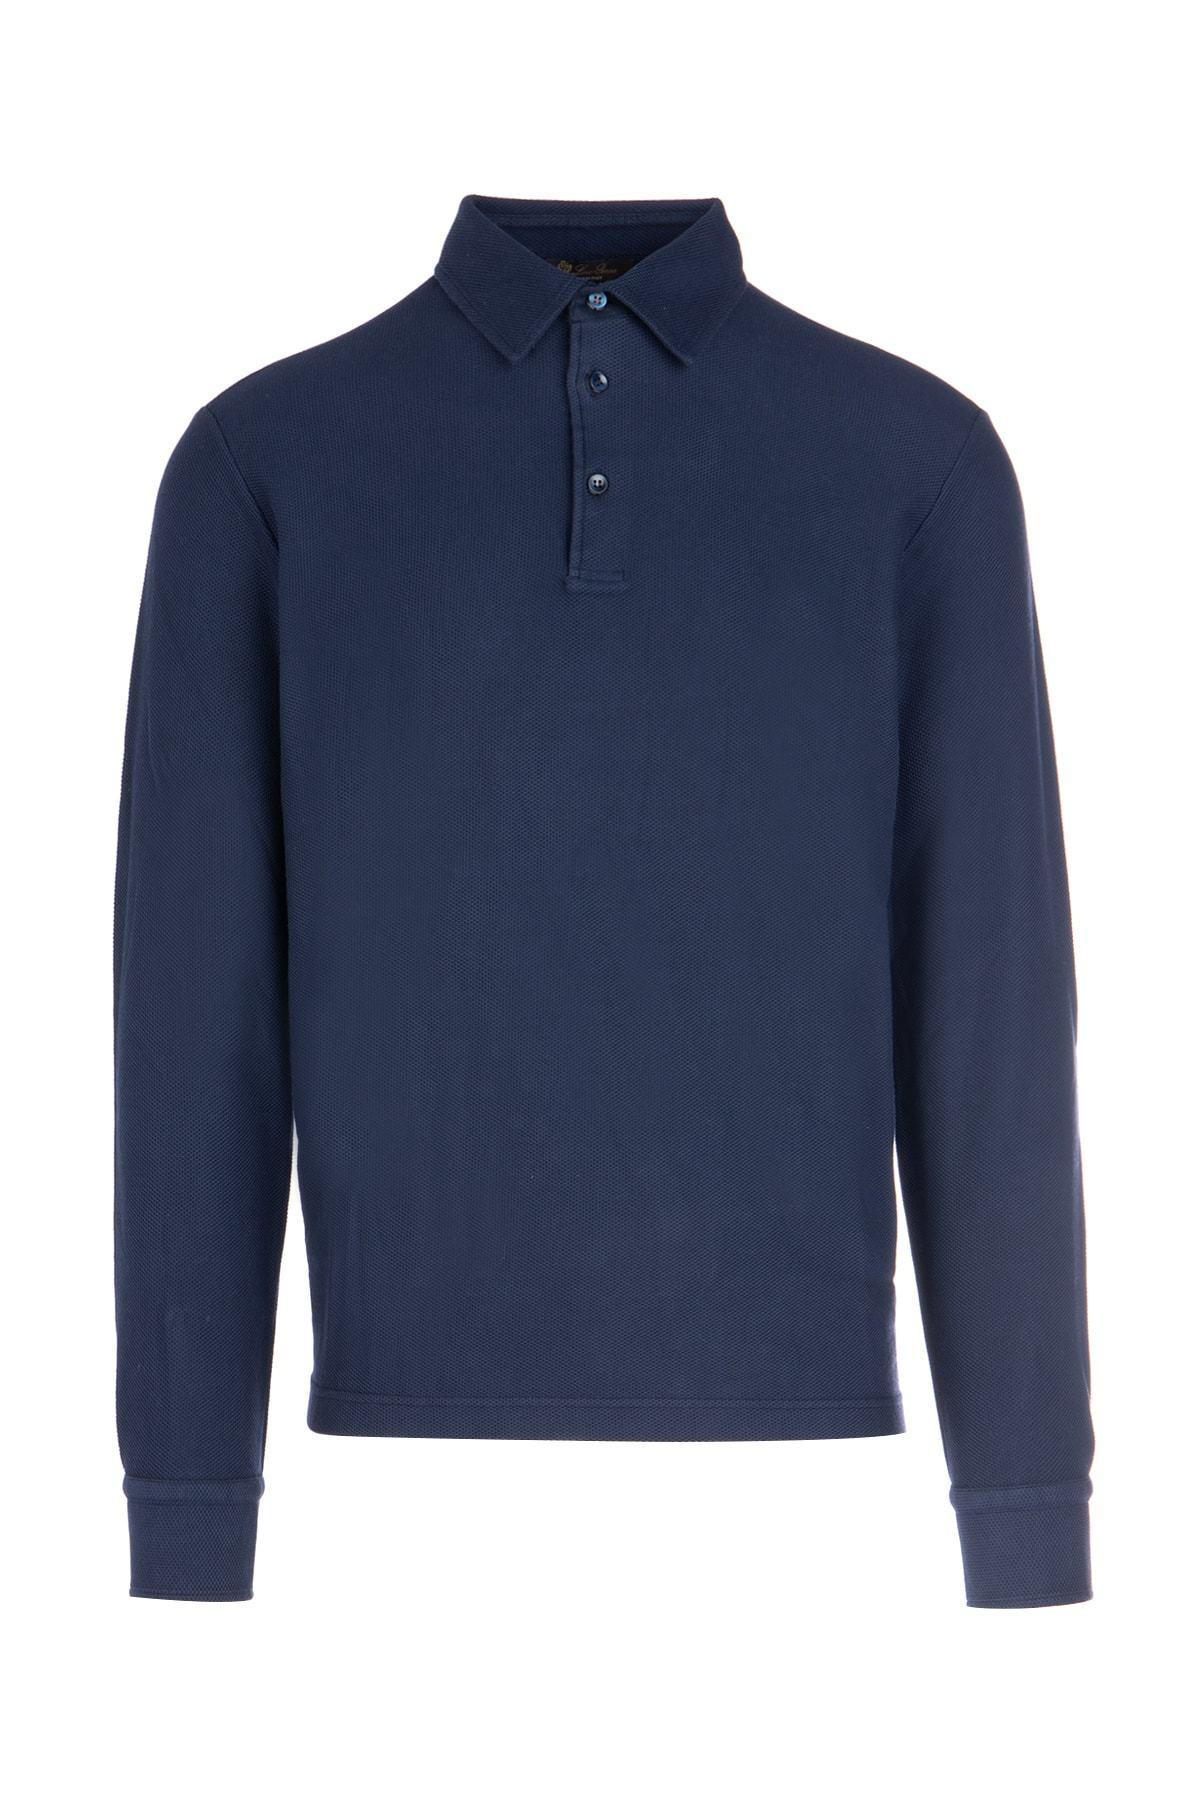 Loro Piana Cotton Long Sleeved Polo Shirt in Blue for Men - Lyst